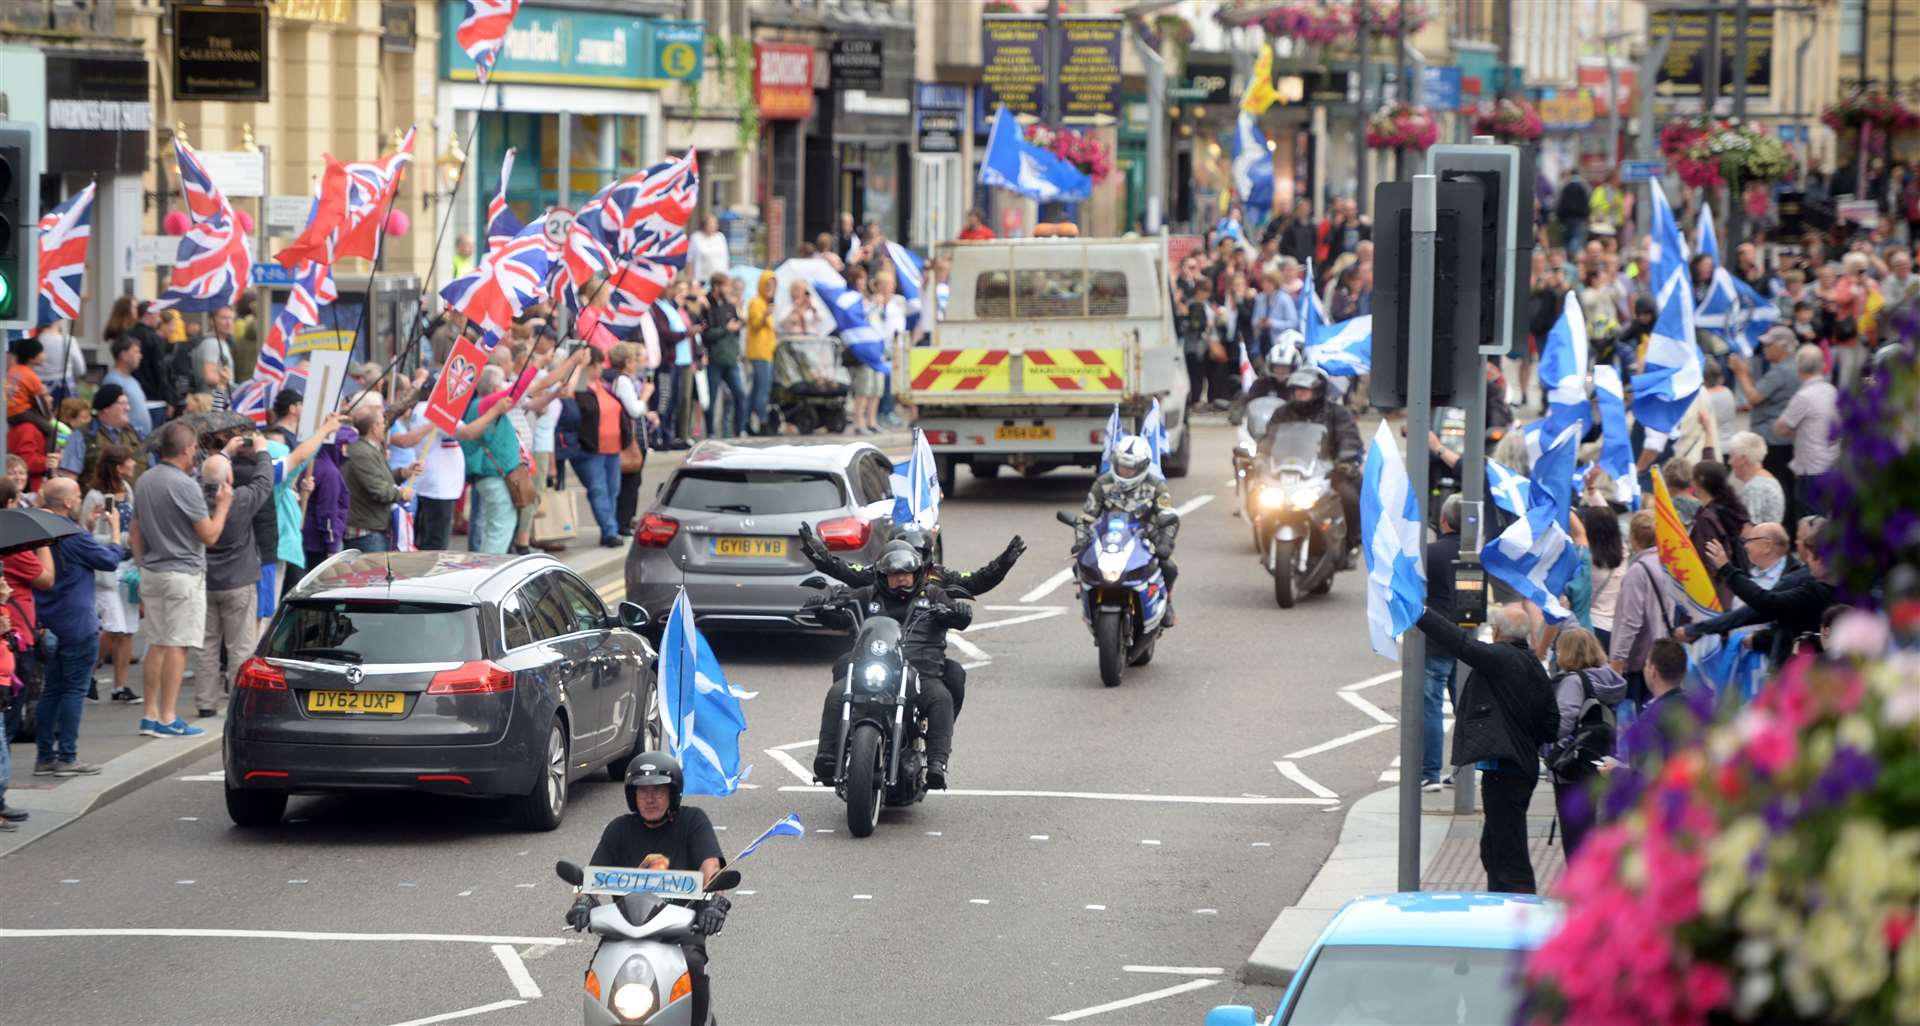 Unionist protestors were playing loud music ahead of the march arrival. The appearance of pro independence bikers revving their engines on the High Street drowned them out completely.....All Under One Banner..Picture: Gair Fraser. Image No. 041709...